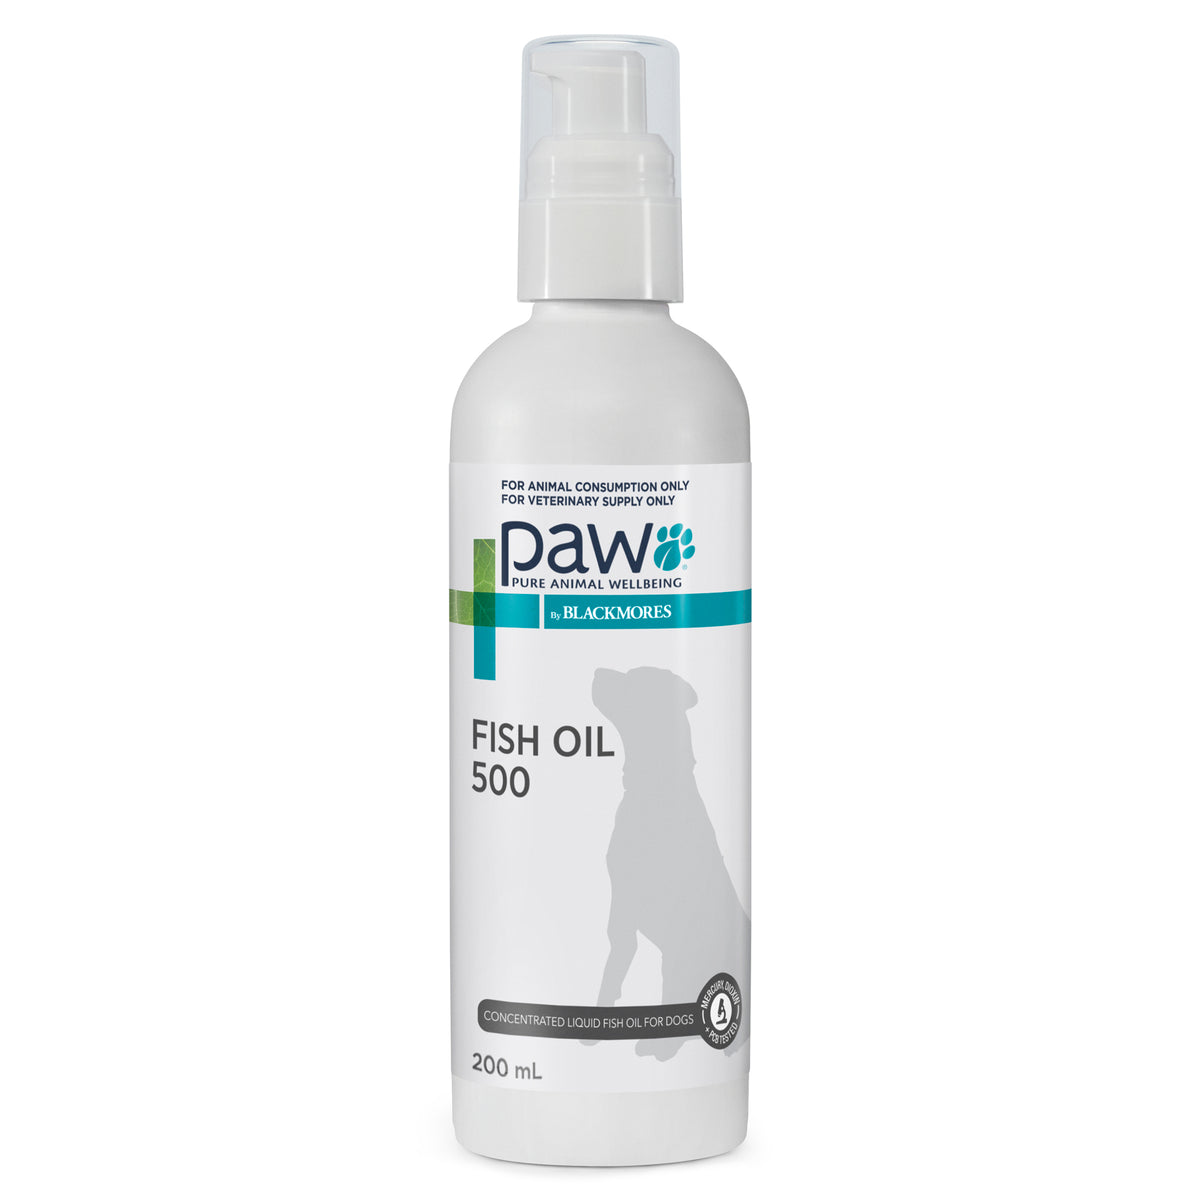 PAW by Blackmores Fish Oil 500 for Dogs - Veterinary Strength